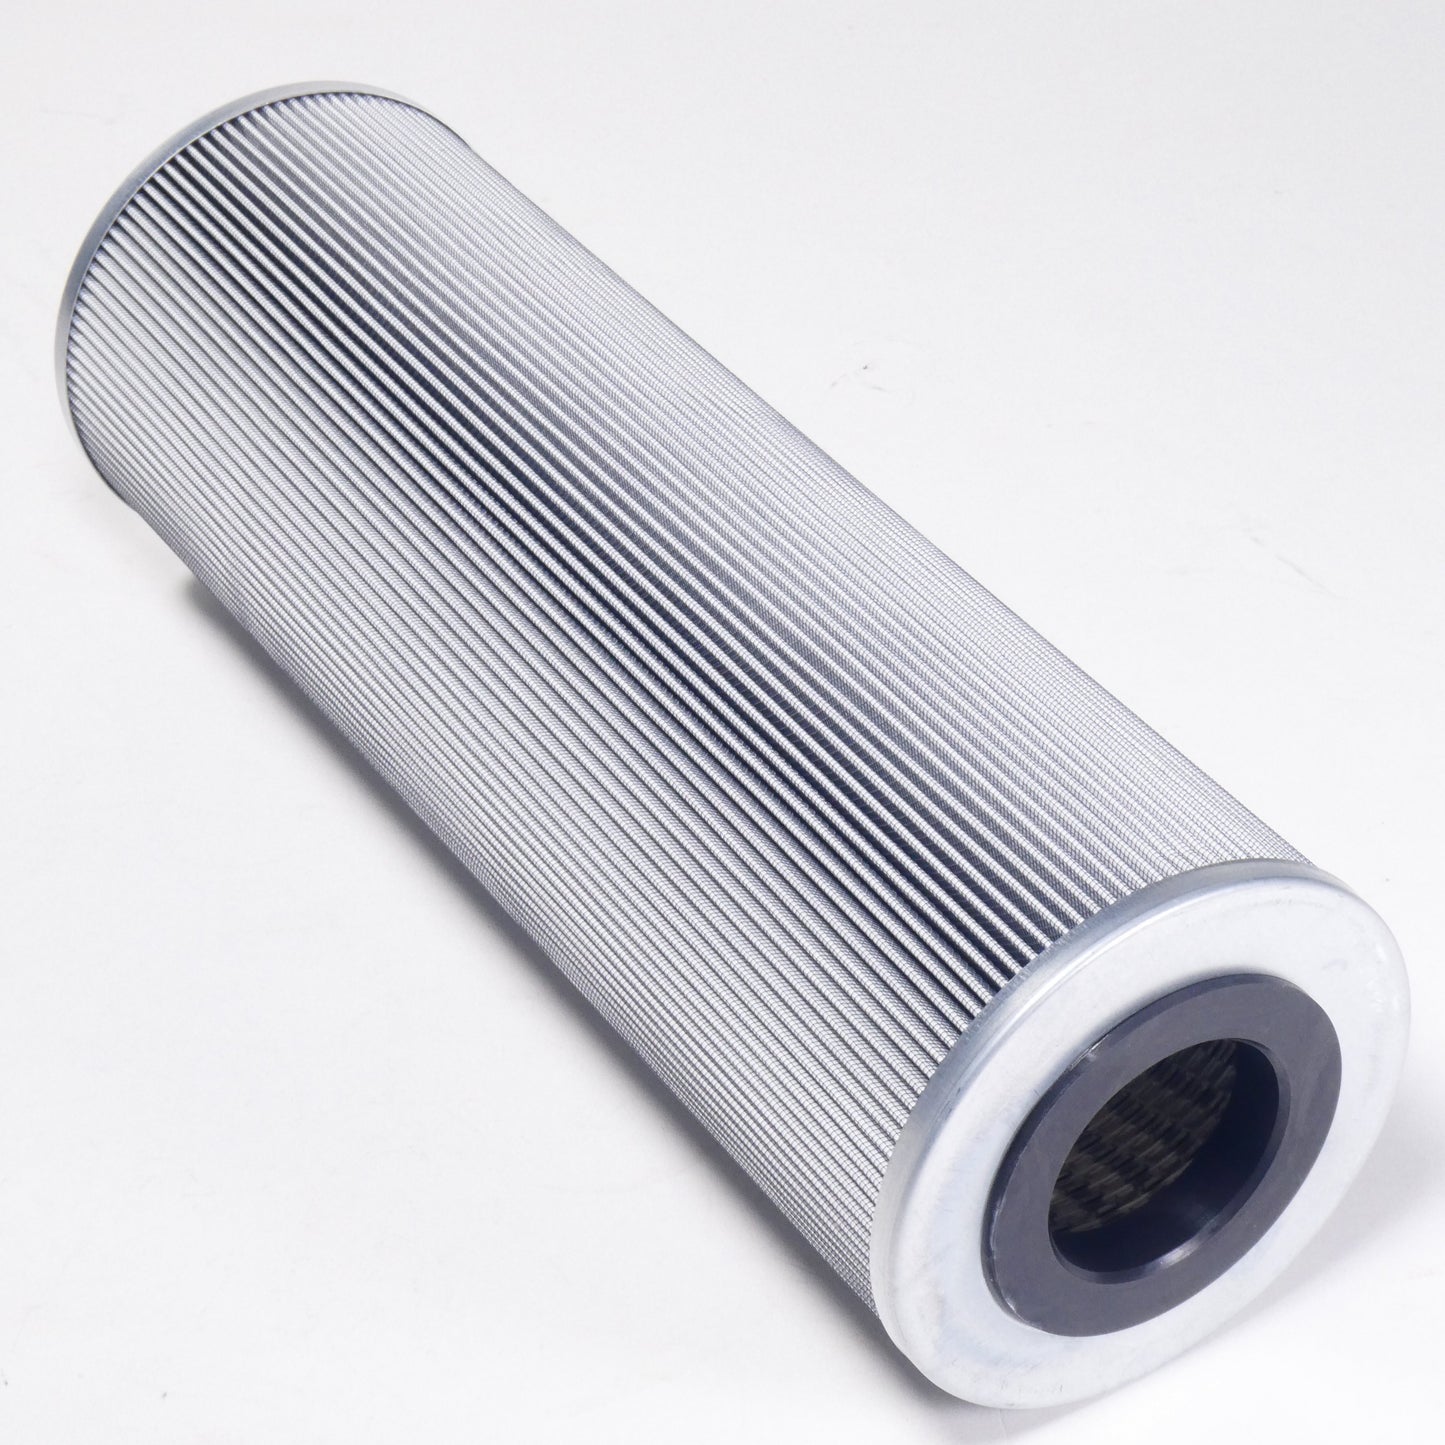 Hydrafil Replacement Filter Element for Hilco PL718-40-CNN